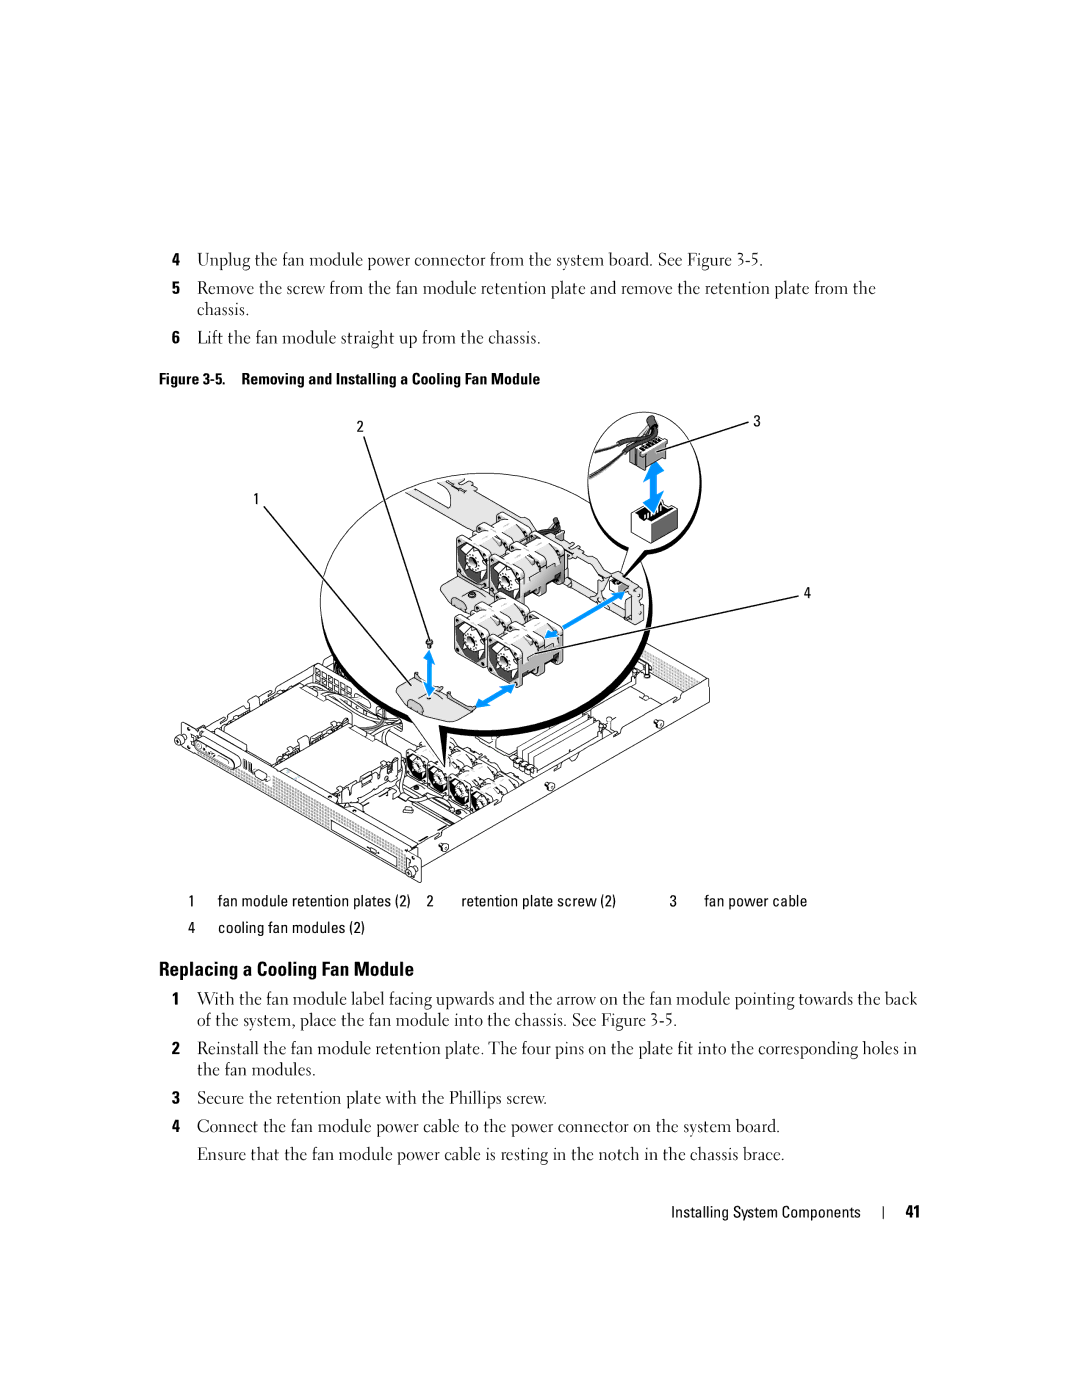 Dell SC1435 owner manual Replacing a Cooling Fan Module, Cooling fan modules 